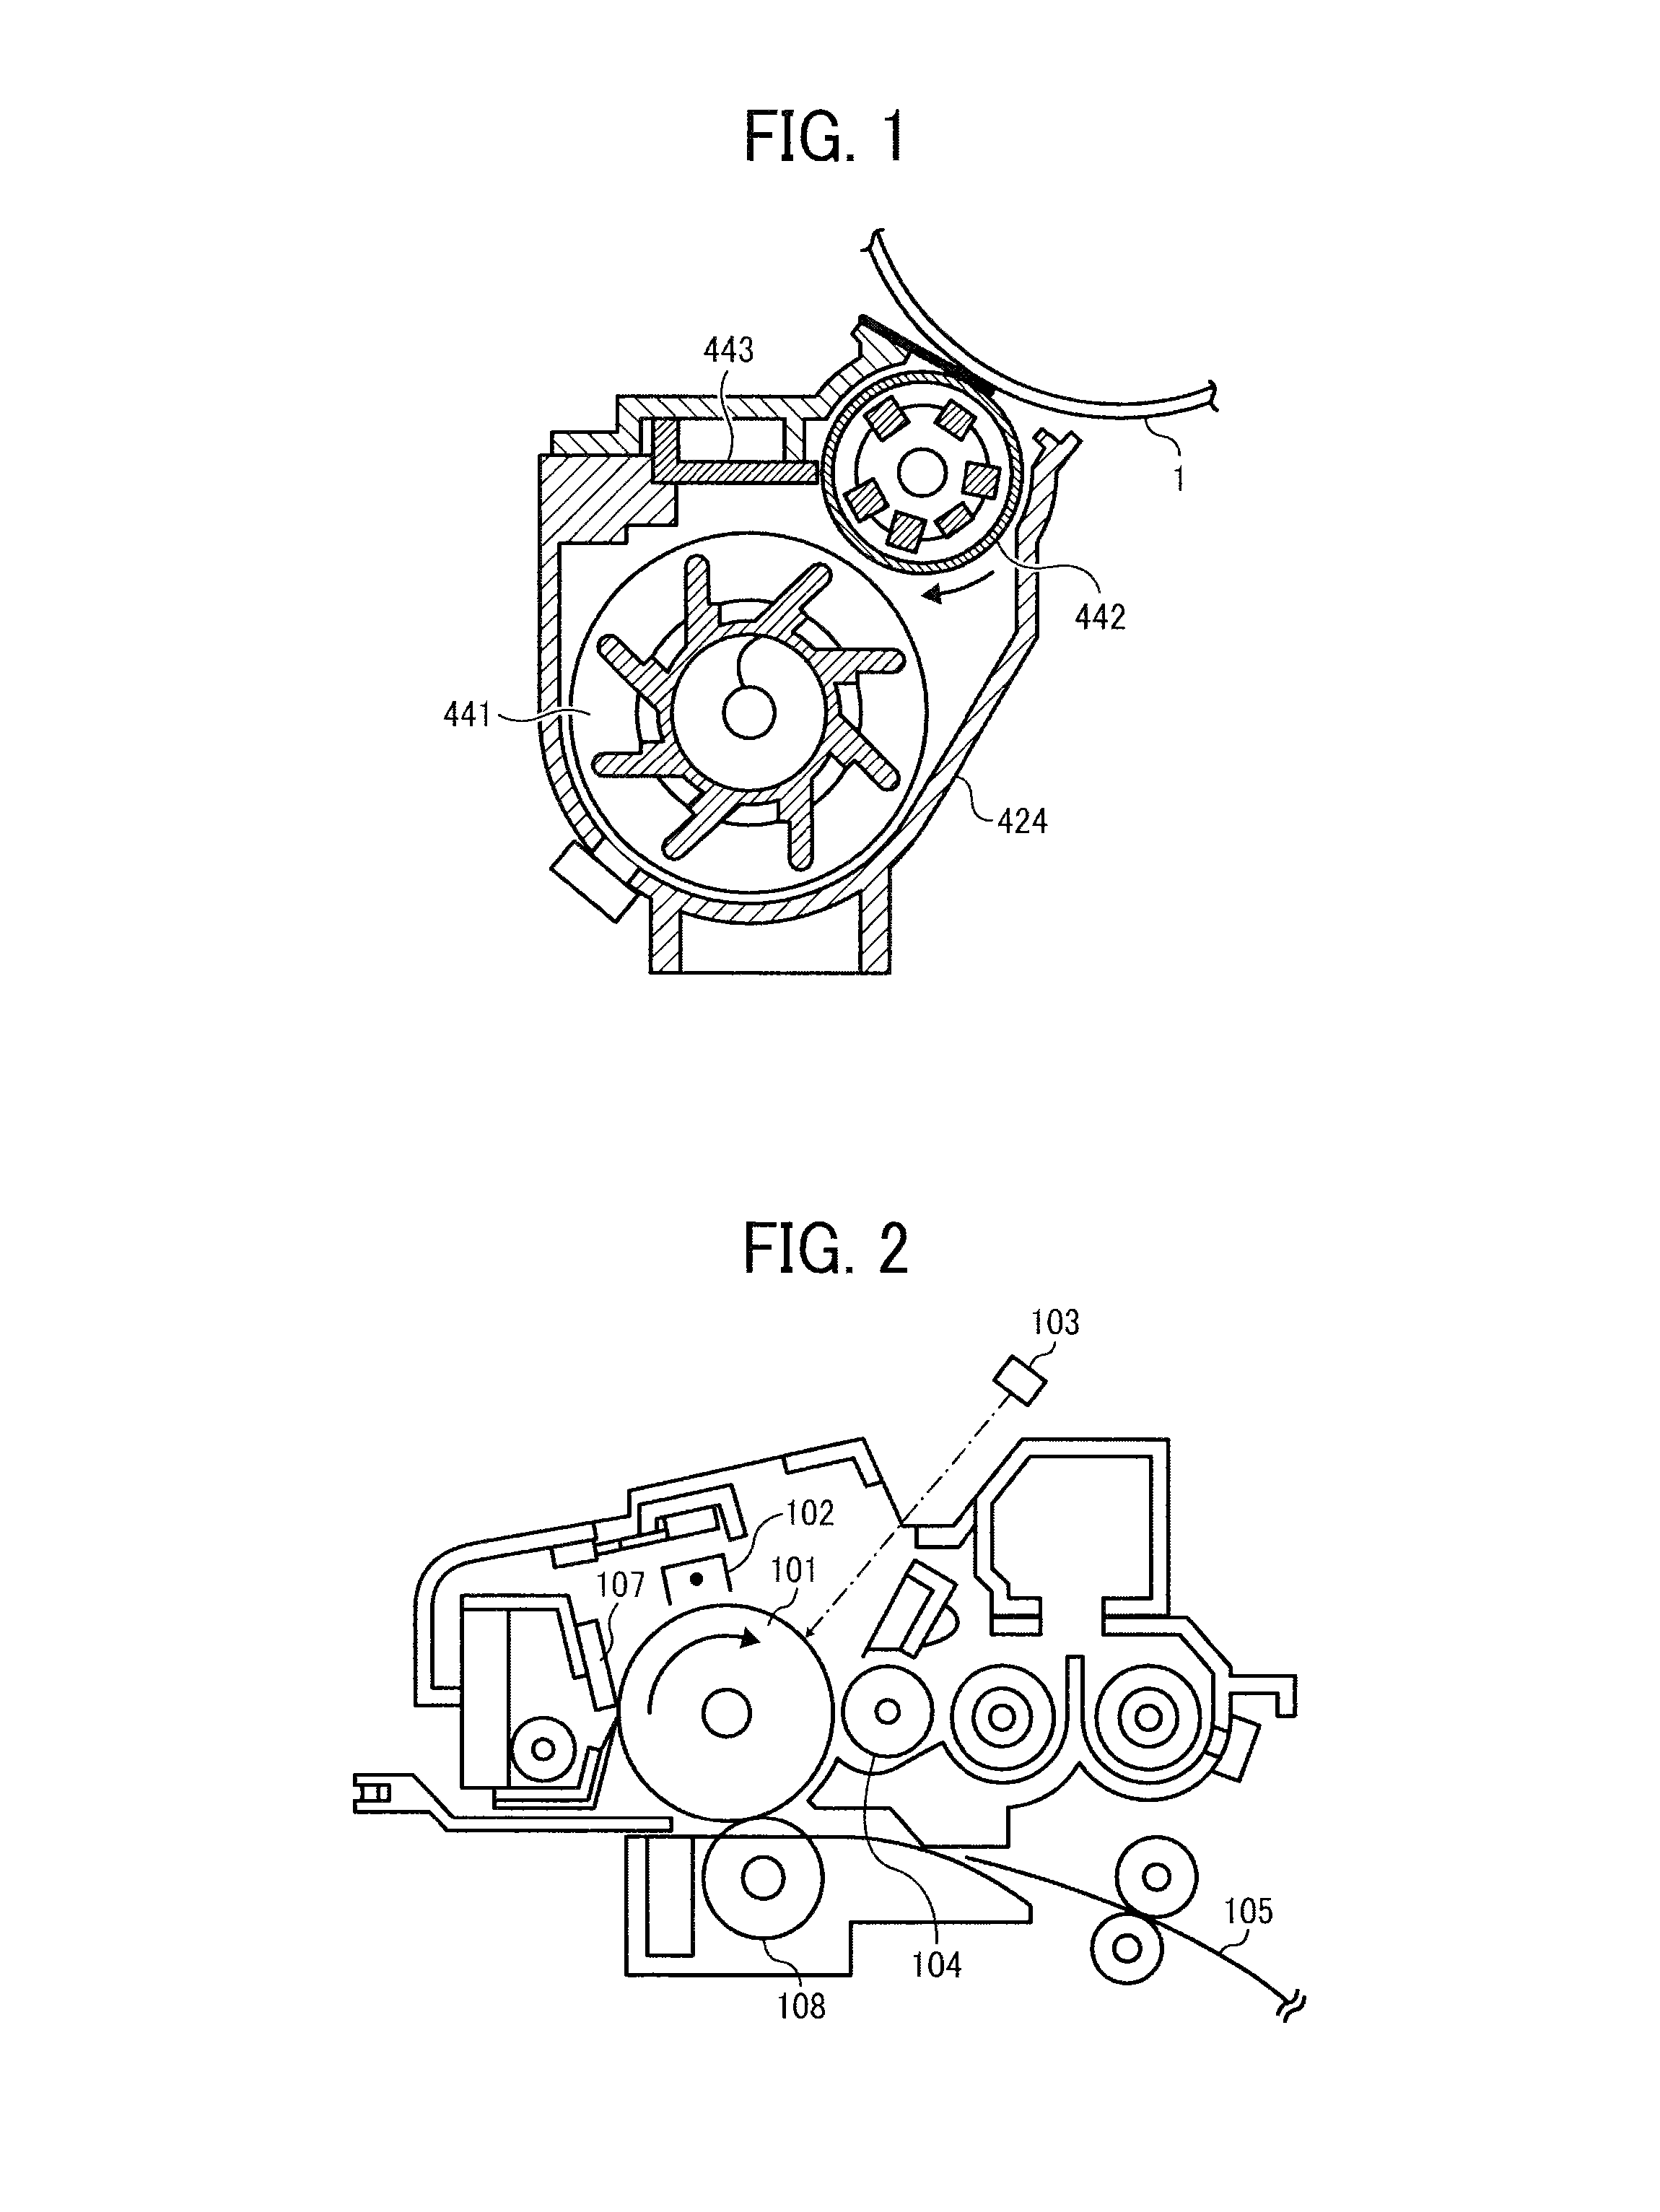 Toner and development agent, image forming apparatus, and process cartridge using the same